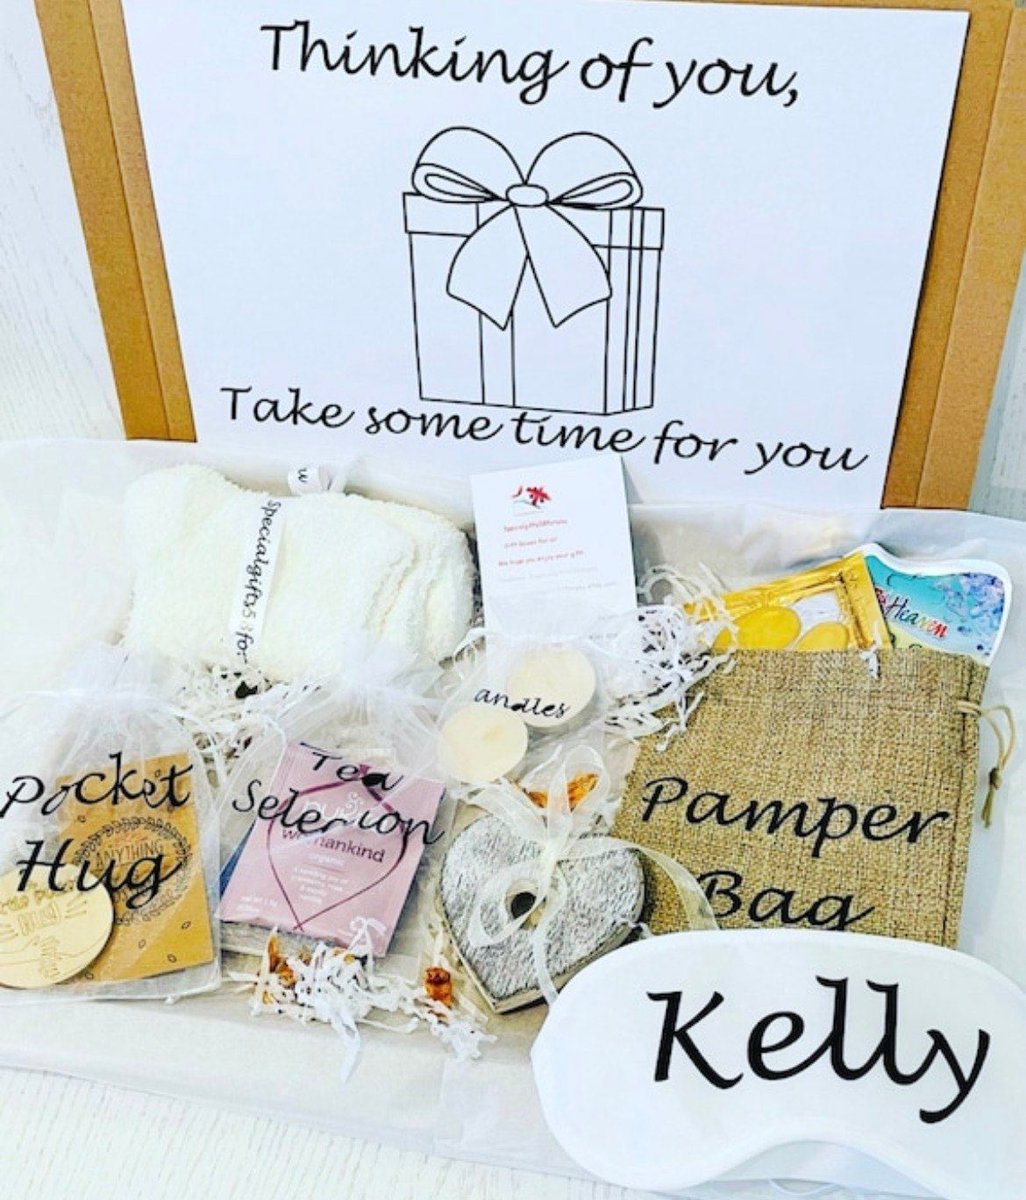 Personalised get well gift. Self care. Cheer up gift. Hospital gift. ktspecialgifts.etsy.com/listing/145201… #recoverygift #giftforher #craftbizparty #earlybiz #etsy #personalised #hospitalgift #cheerupgift #yougotthis #specialgifts #pamperhamper #wellness #selfcare